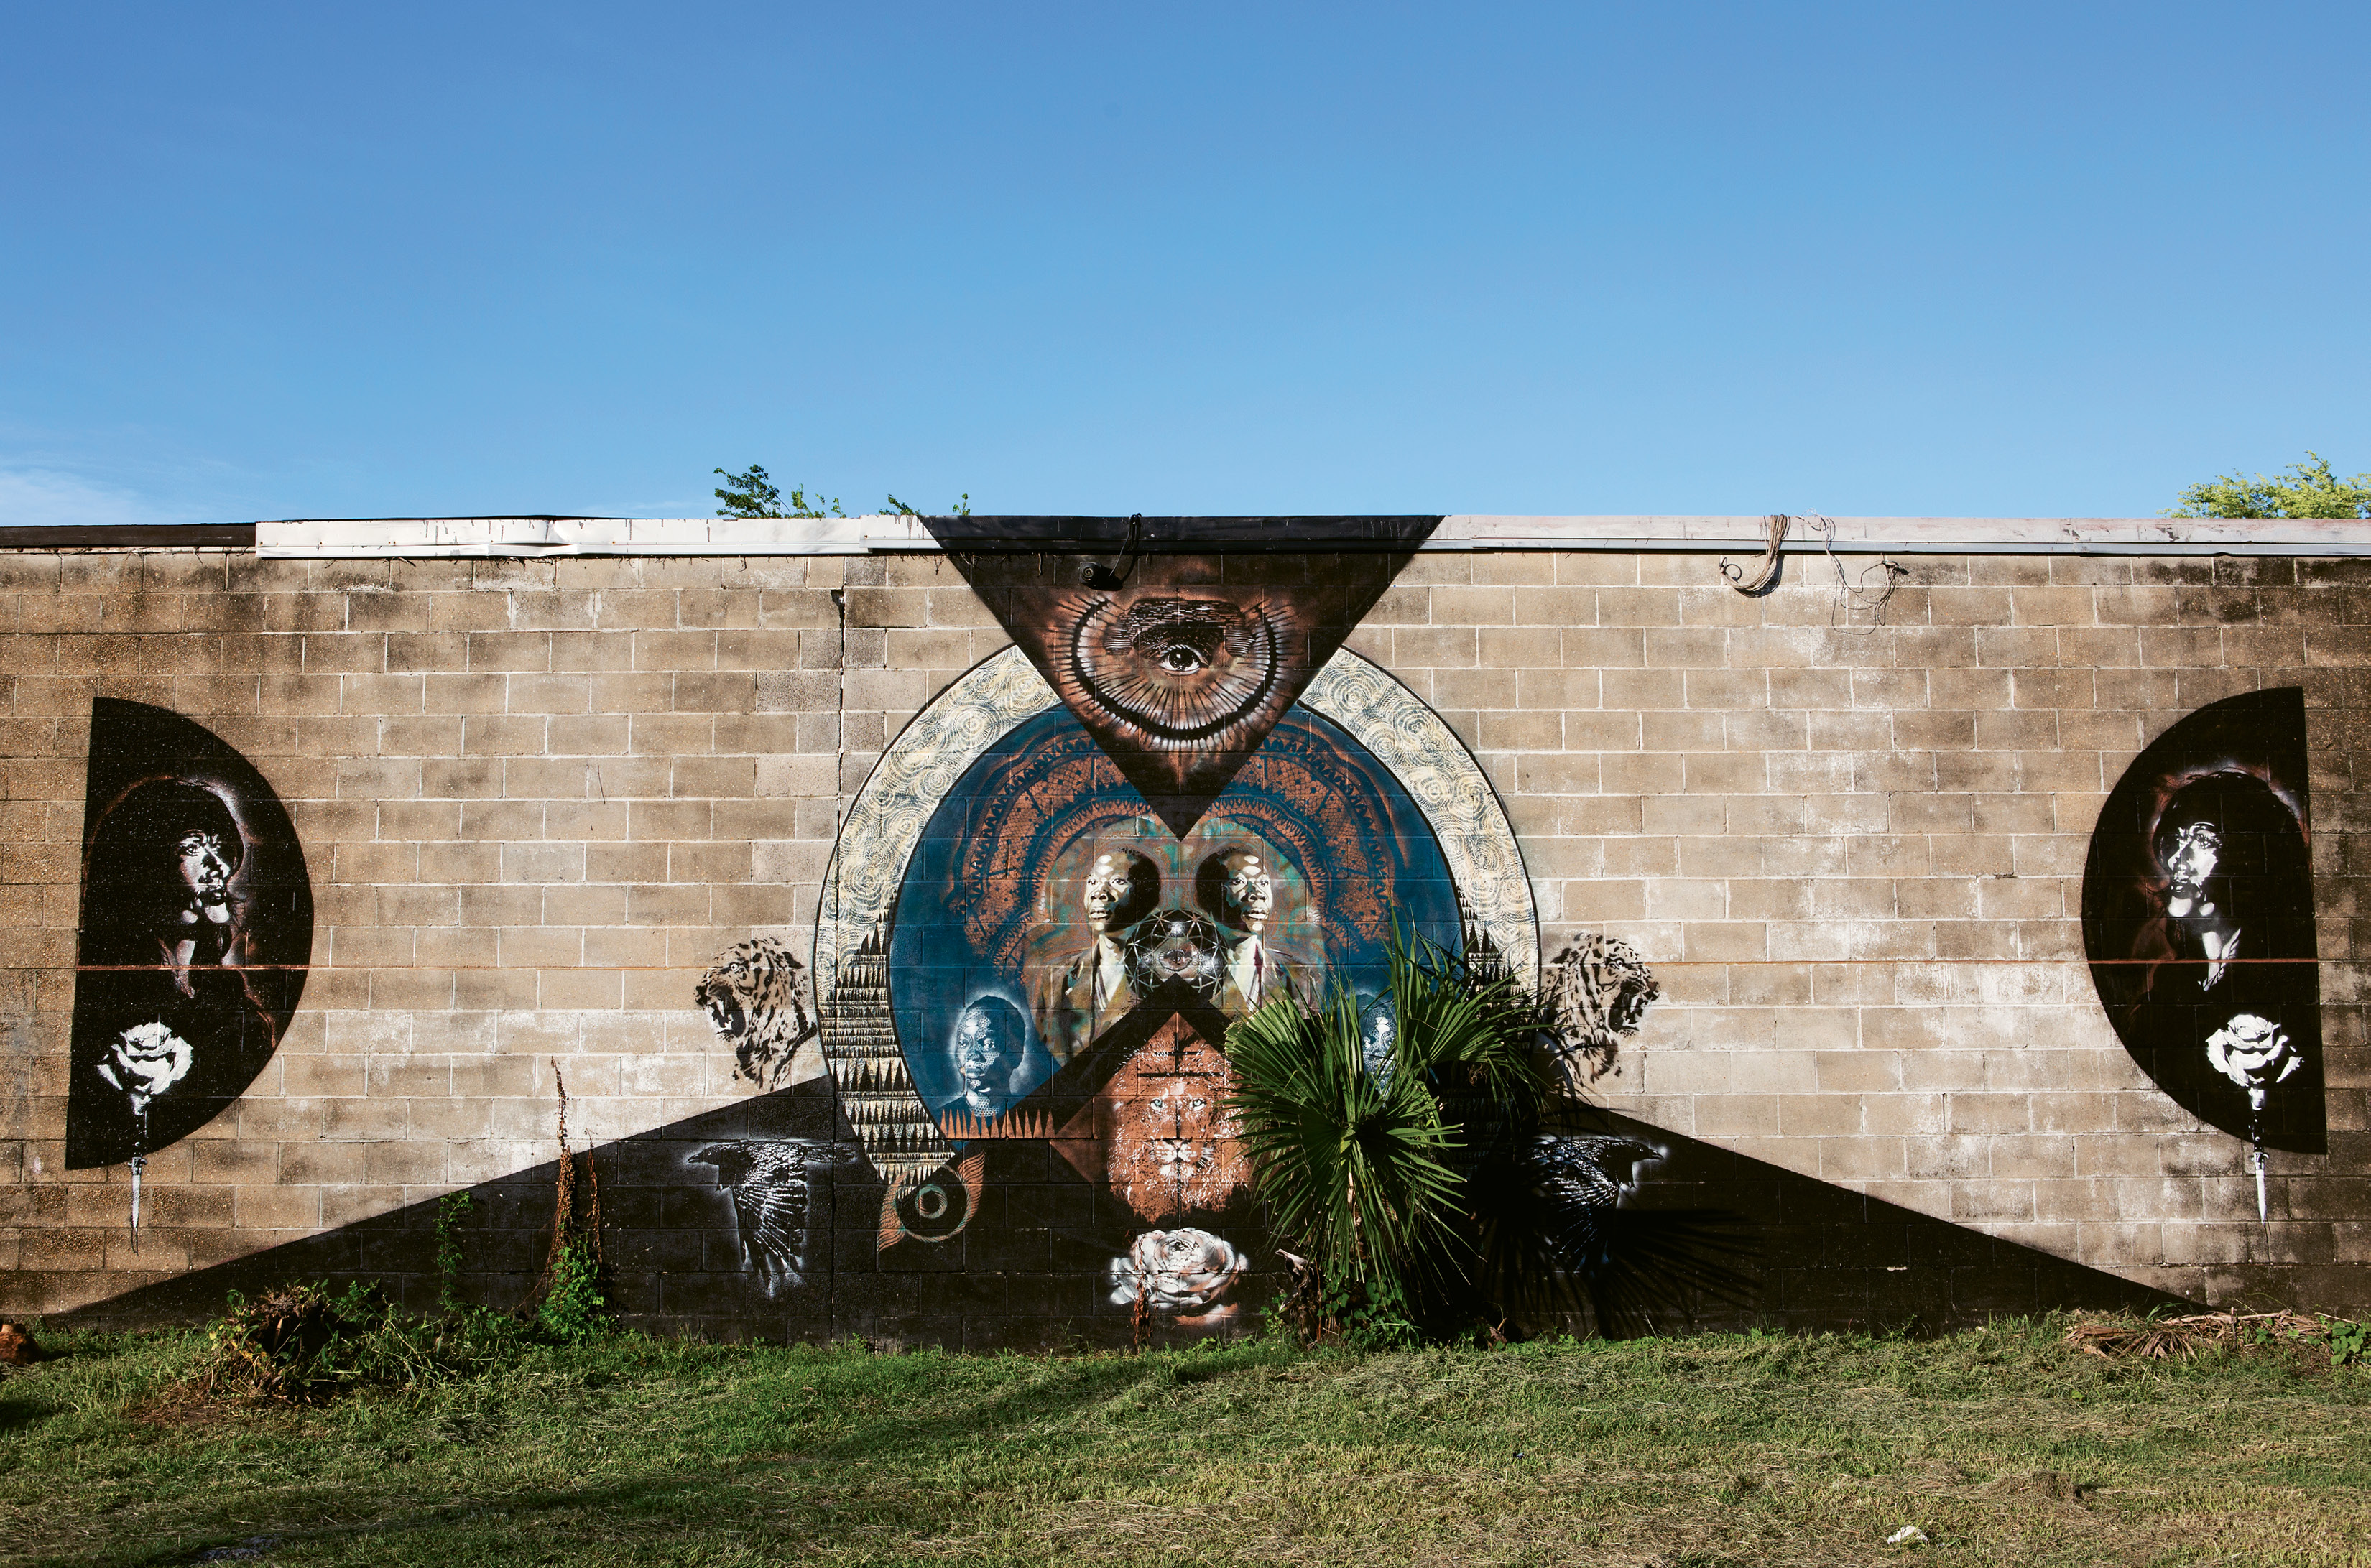 Living Stone by RC Hagans,  June 2015  (Huger &amp; Hanover streets). Created alongside seven other works for Enough Pie’s “AWAKENING III: SOLSTICE” community art event, this mural by Alabama-based artist RC Hagans was inspired by a home for boys orphaned by violence and disease in Zambia. he says The central figure is the elder brother and protector: “His lion’s heart and quiet strength make him the perfect watcher for all who walk these streets. If you are weak, may you become strong, if you are strong, protect the weak.”